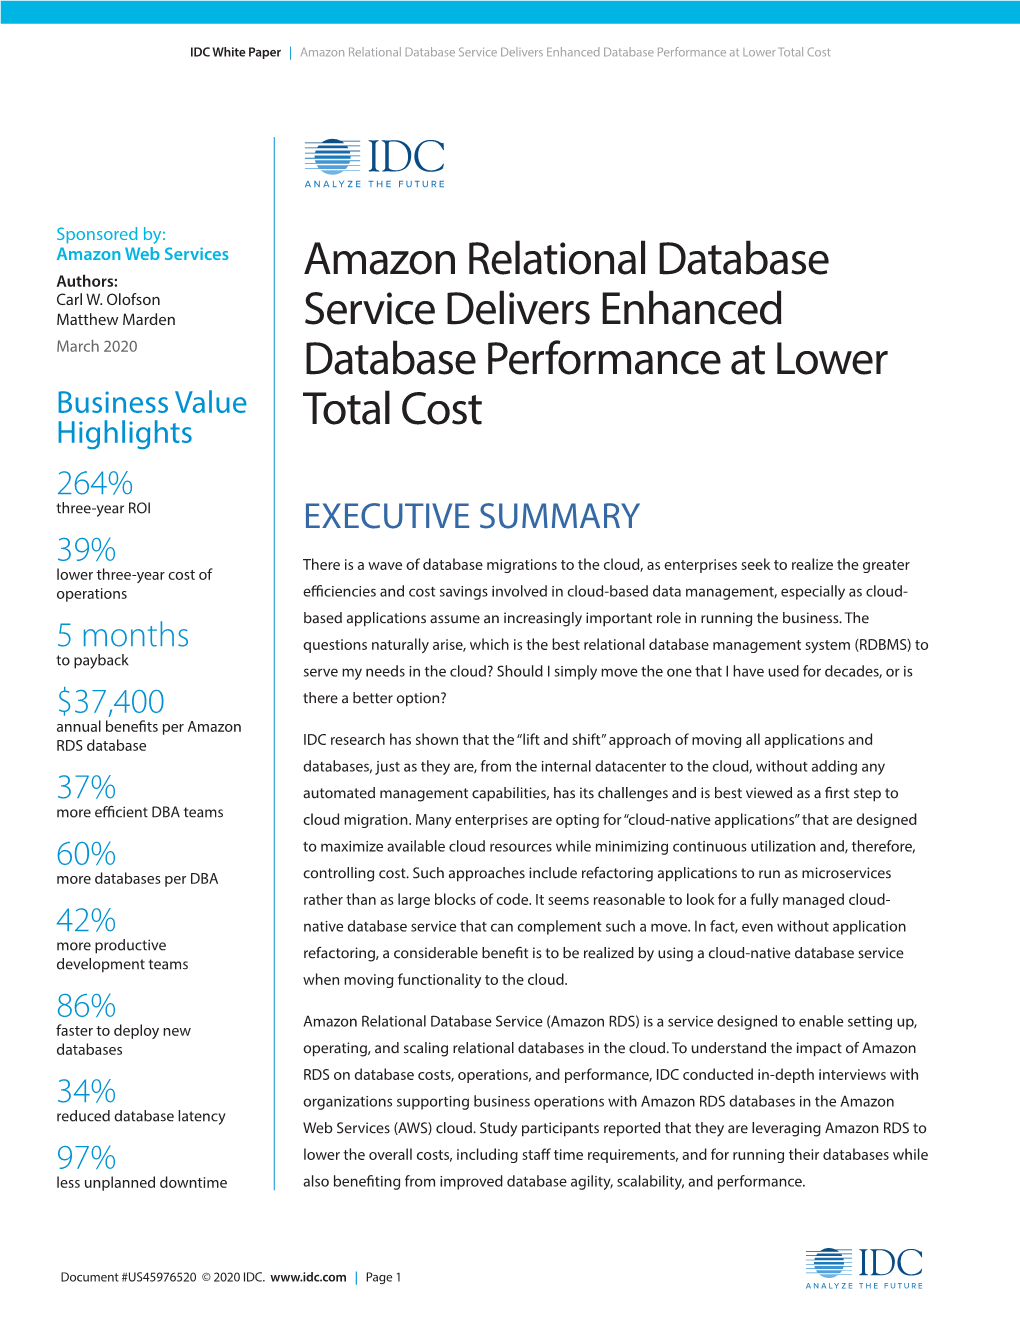 Amazon Relational Database Service Delivers Enhanced Database Performance at Lower Total Cost